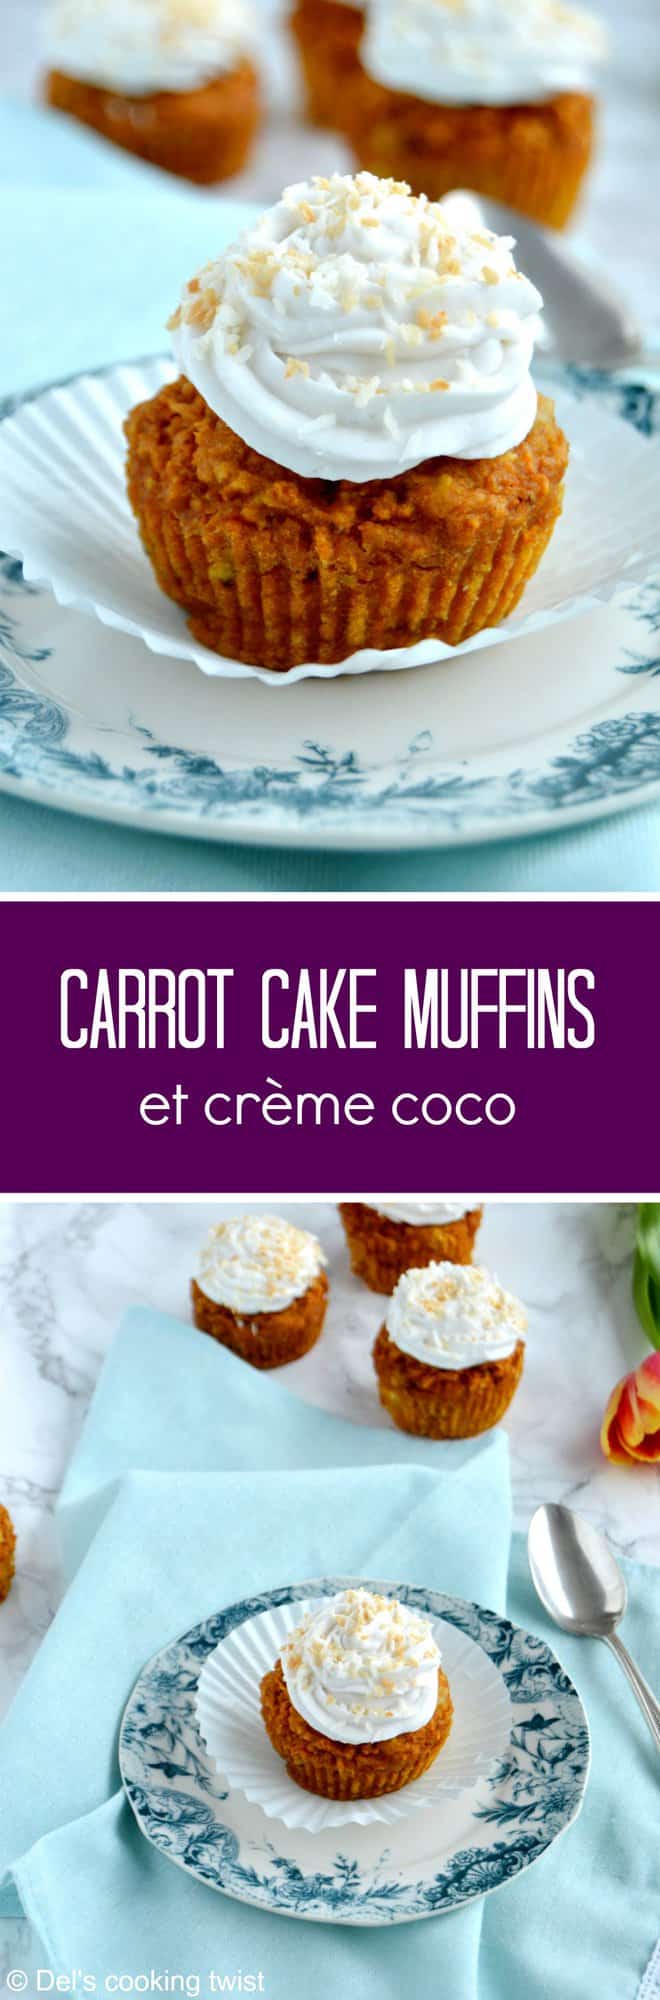 Carrot Cake Muffins et Creme Coco